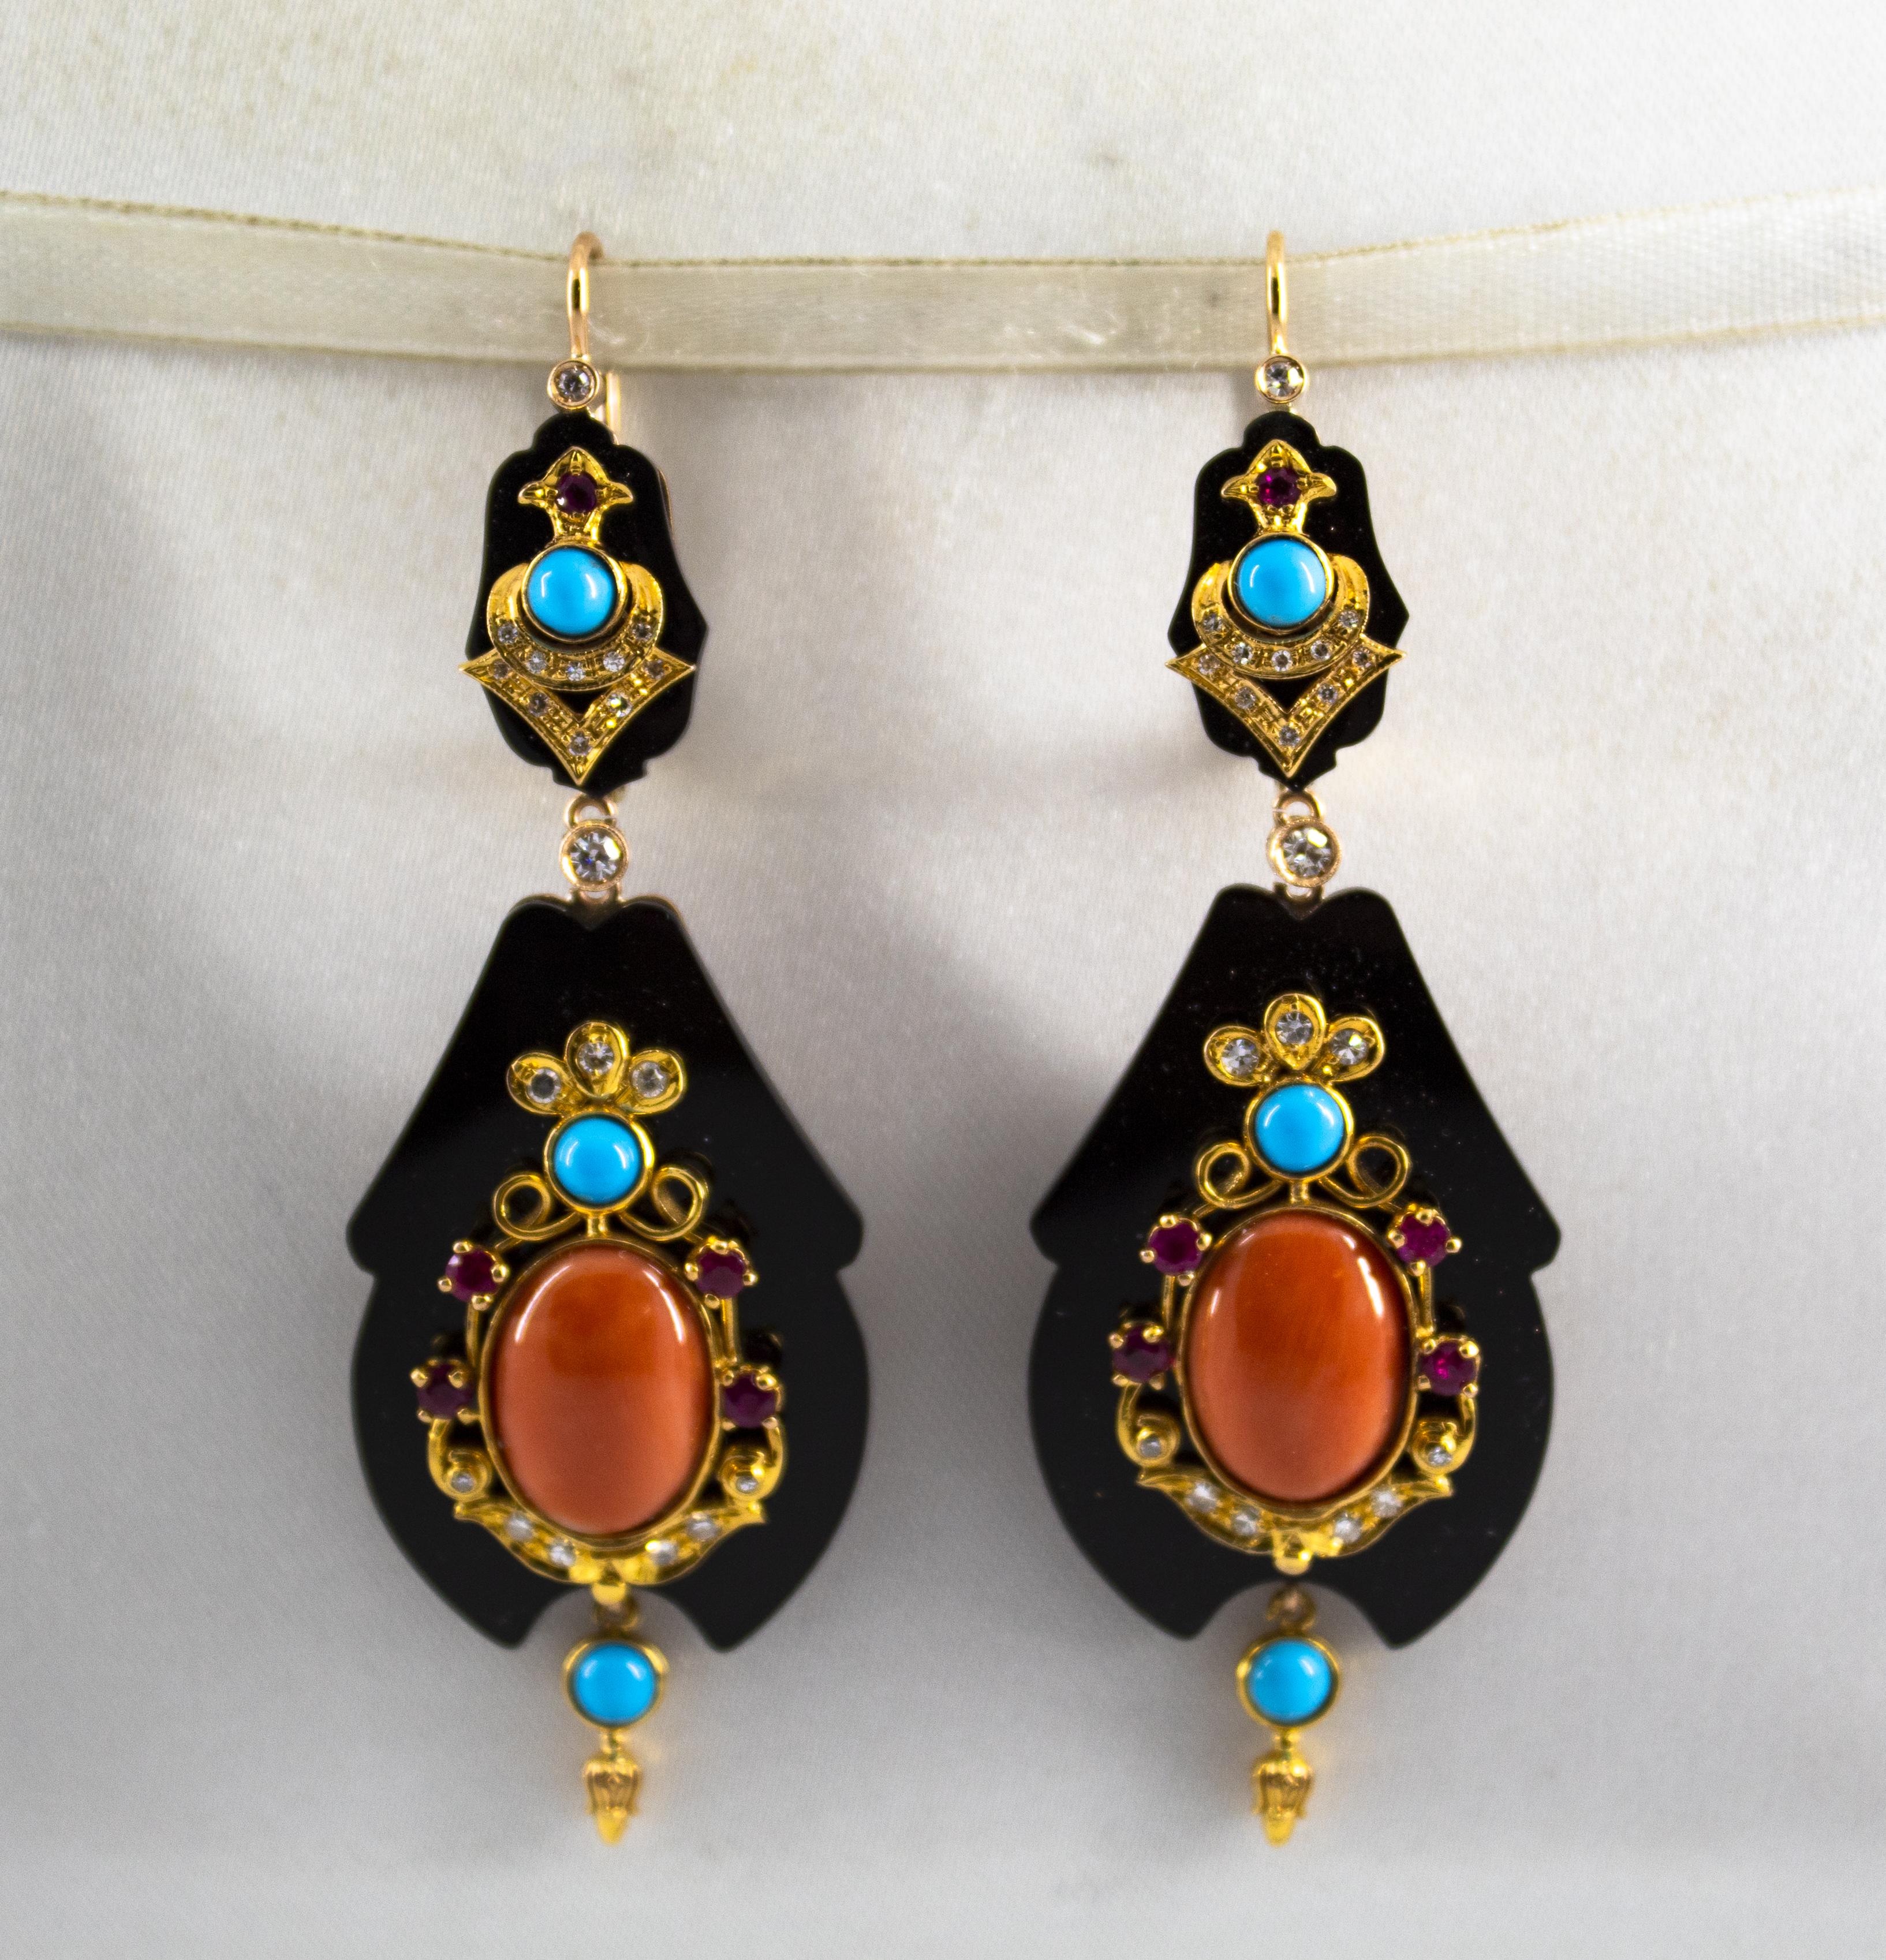 These Earrings are made of 14K Yellow Gold.
These Earrings have 0.60 Carats of White Diamonds.
These Earrings have 0.60 Carats of Rubies.
These Earrings have also Onyx, Turquoise, Red Coral.
We're a workshop so every piece is handmade, customizable